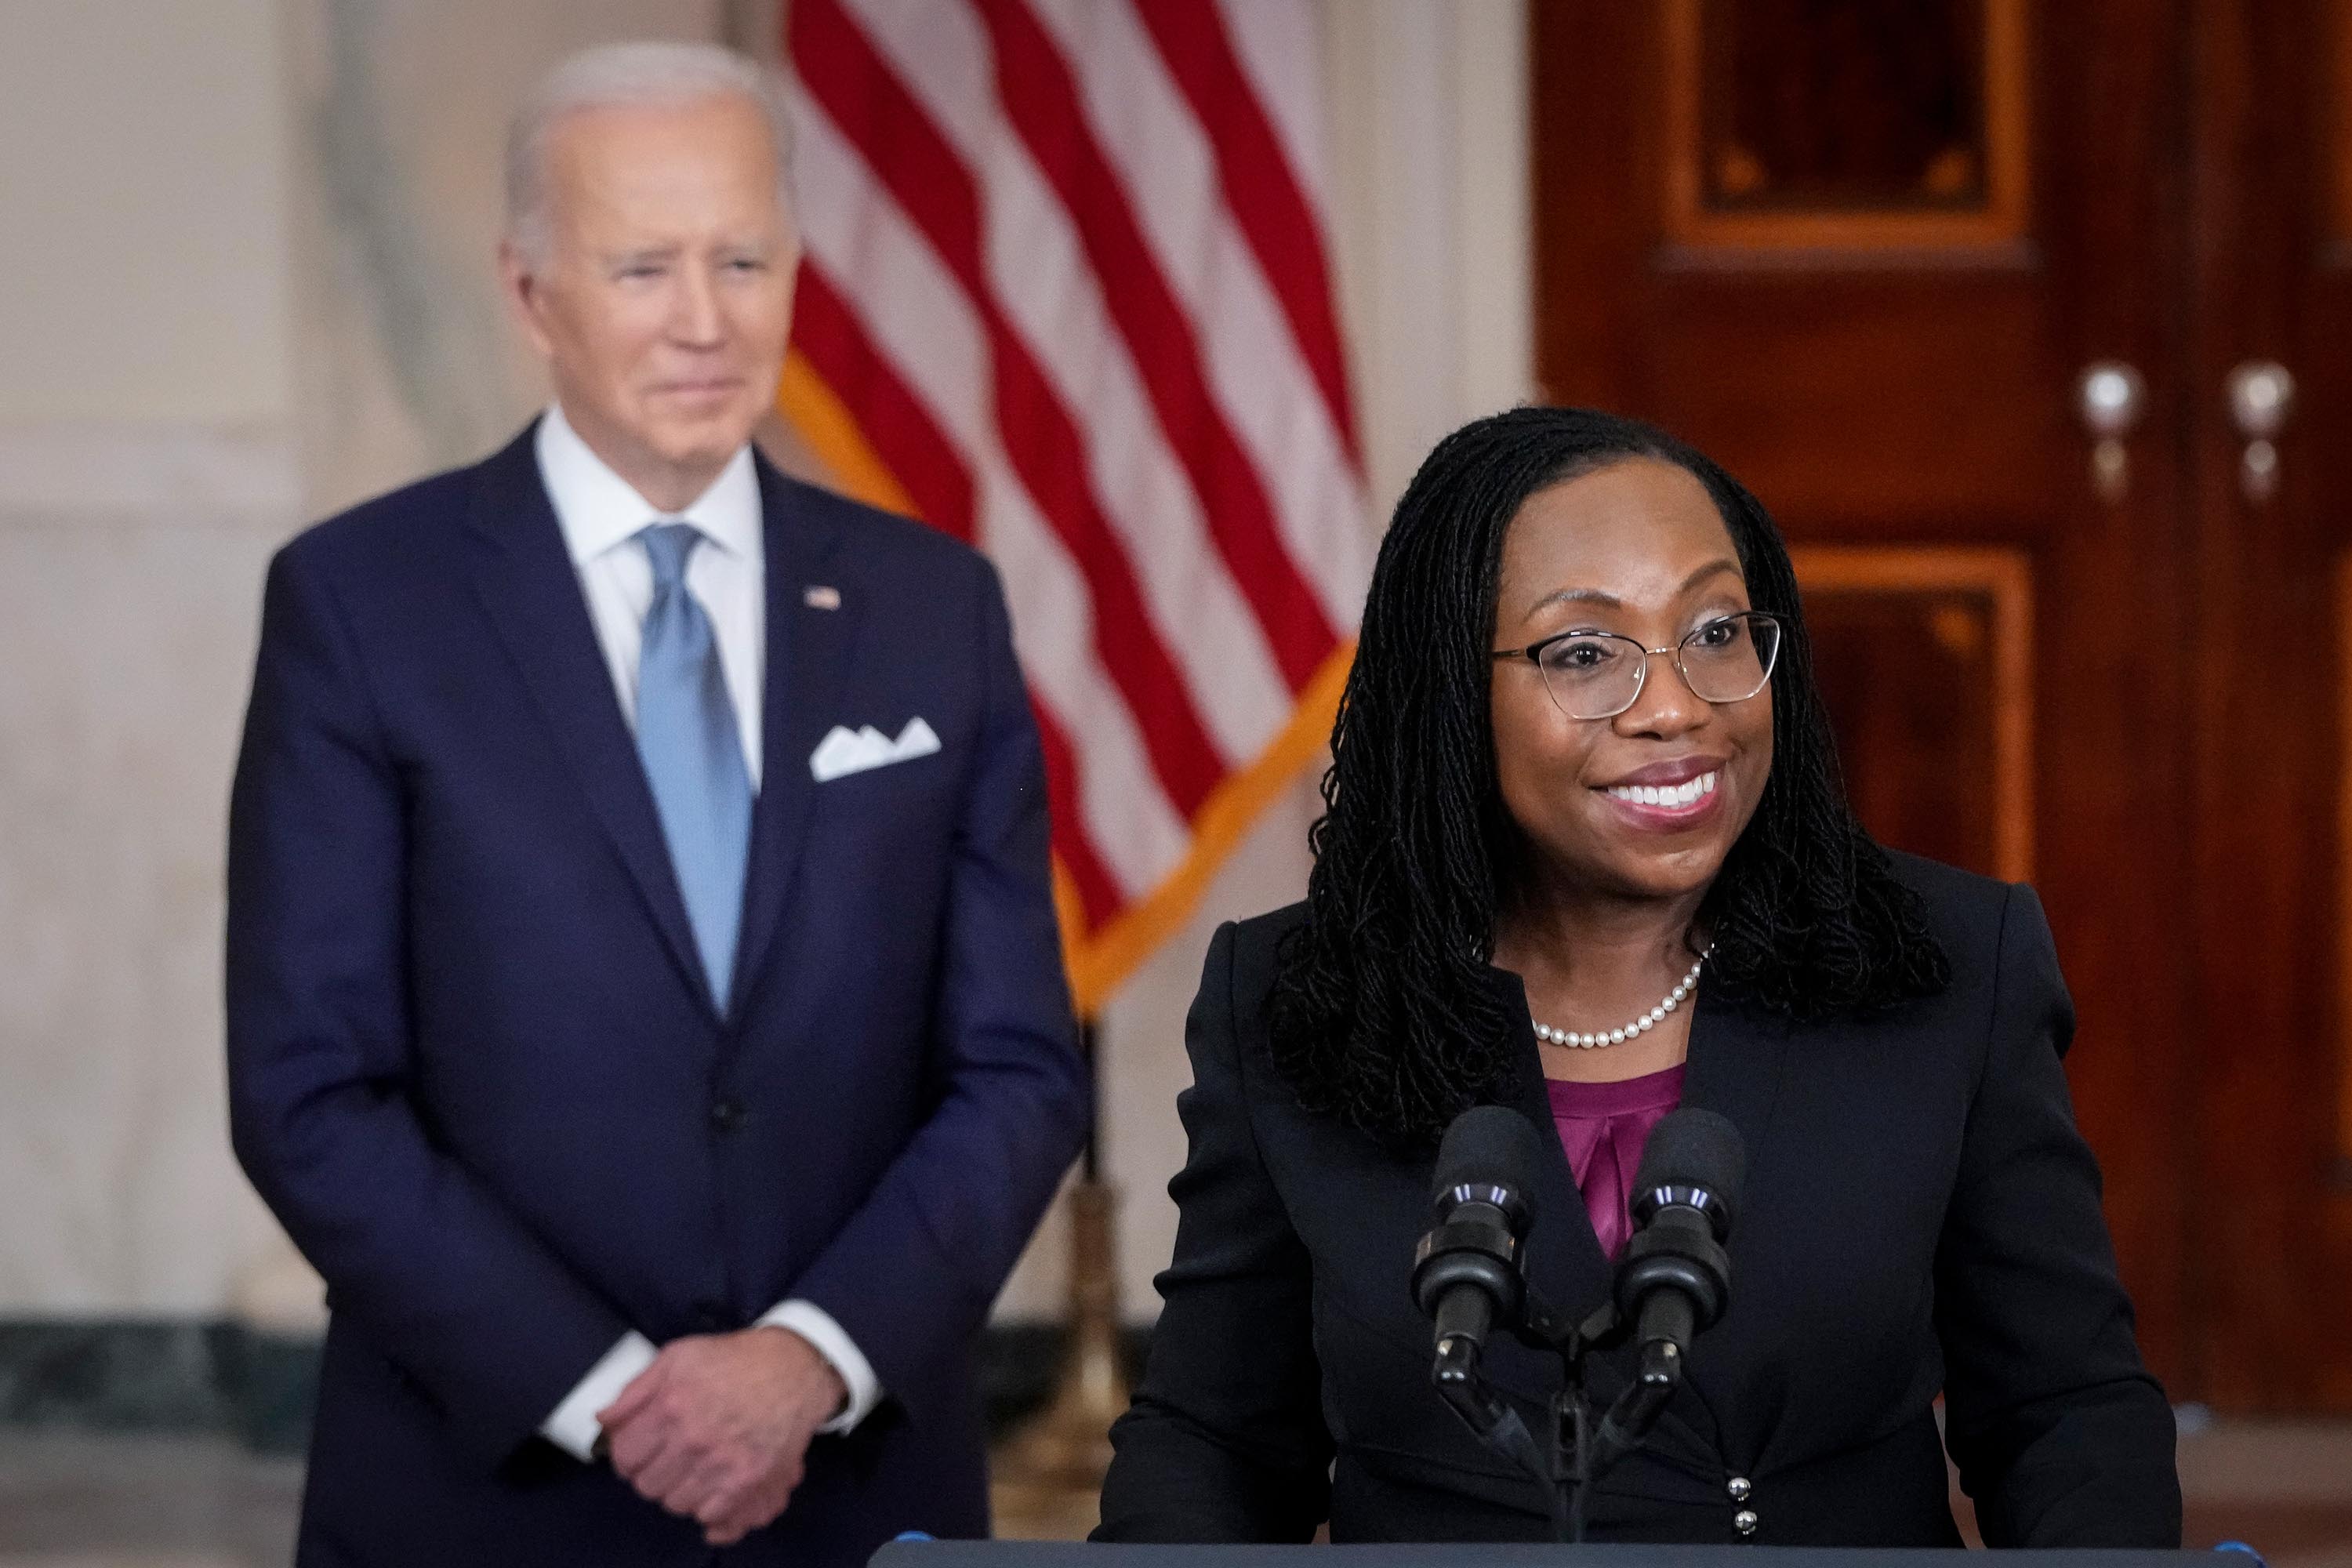 Biden looks on as Ketanji Brown Jackson delivers brief remarks as his nominee to the U.S. Supreme Court during an event in the Cross Hall of the White House February 25, 2022 in Washington, DC. 